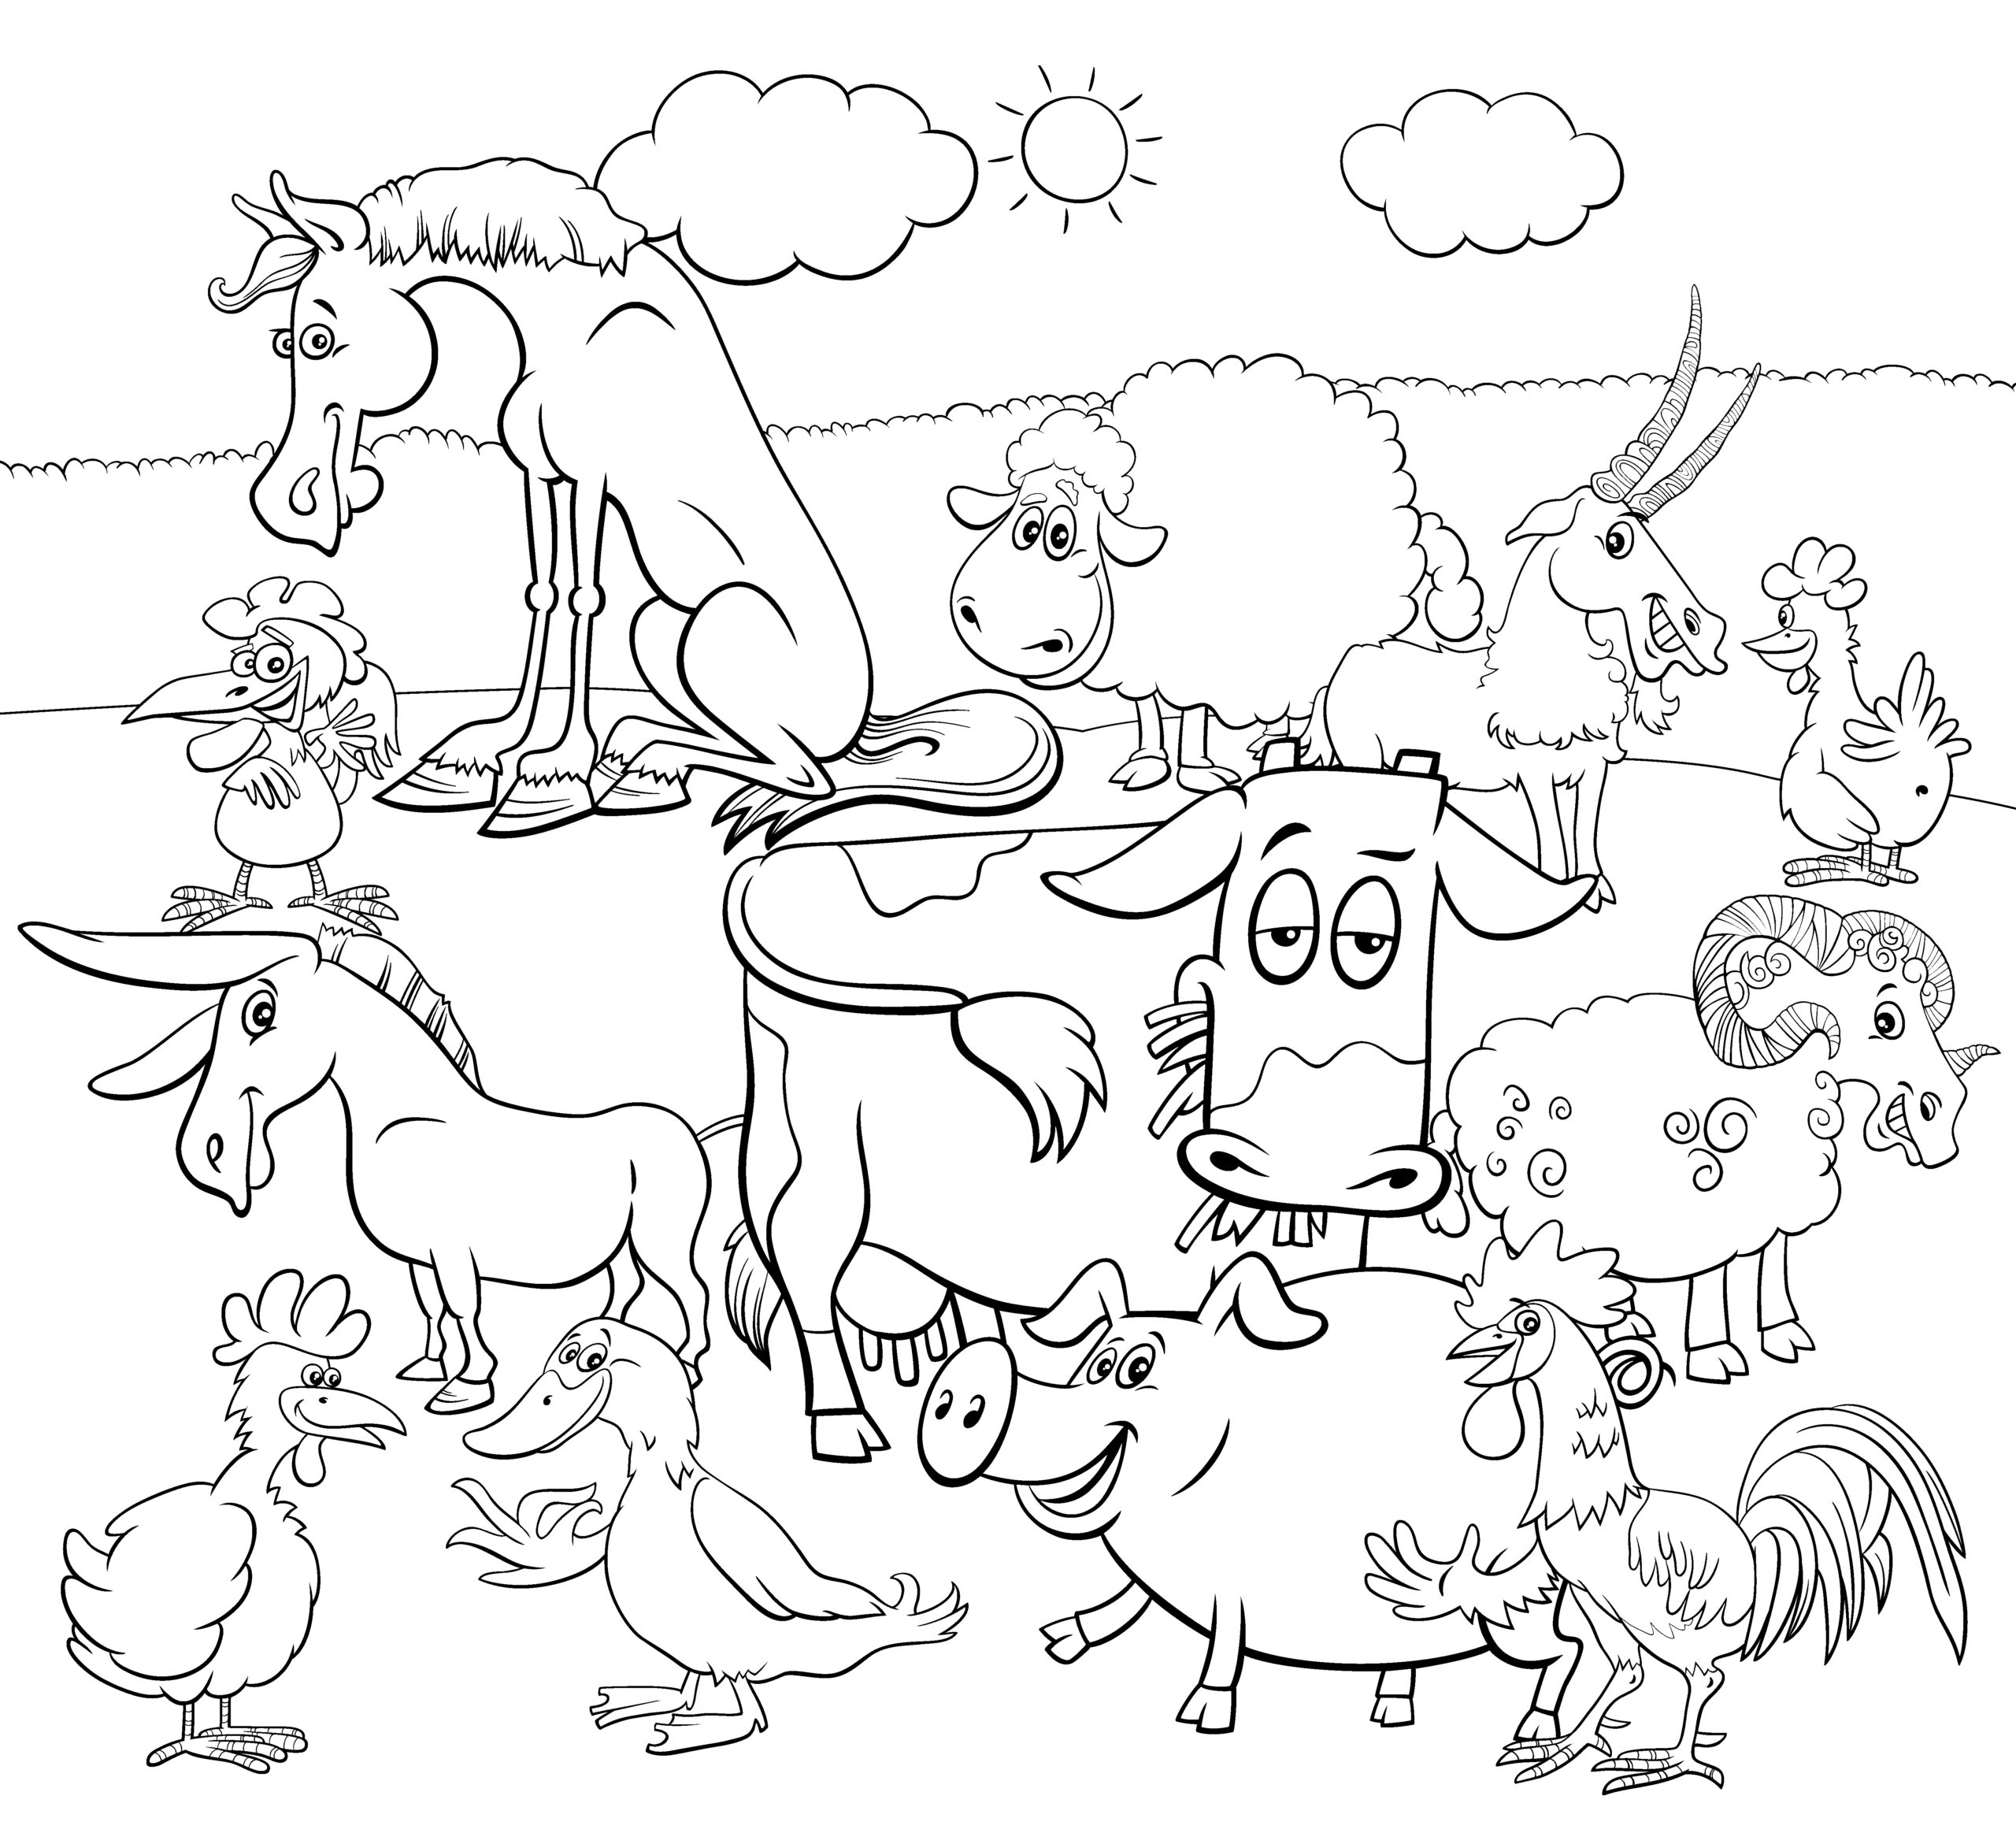 Printable farm coloring pages for kids that farm needs some color